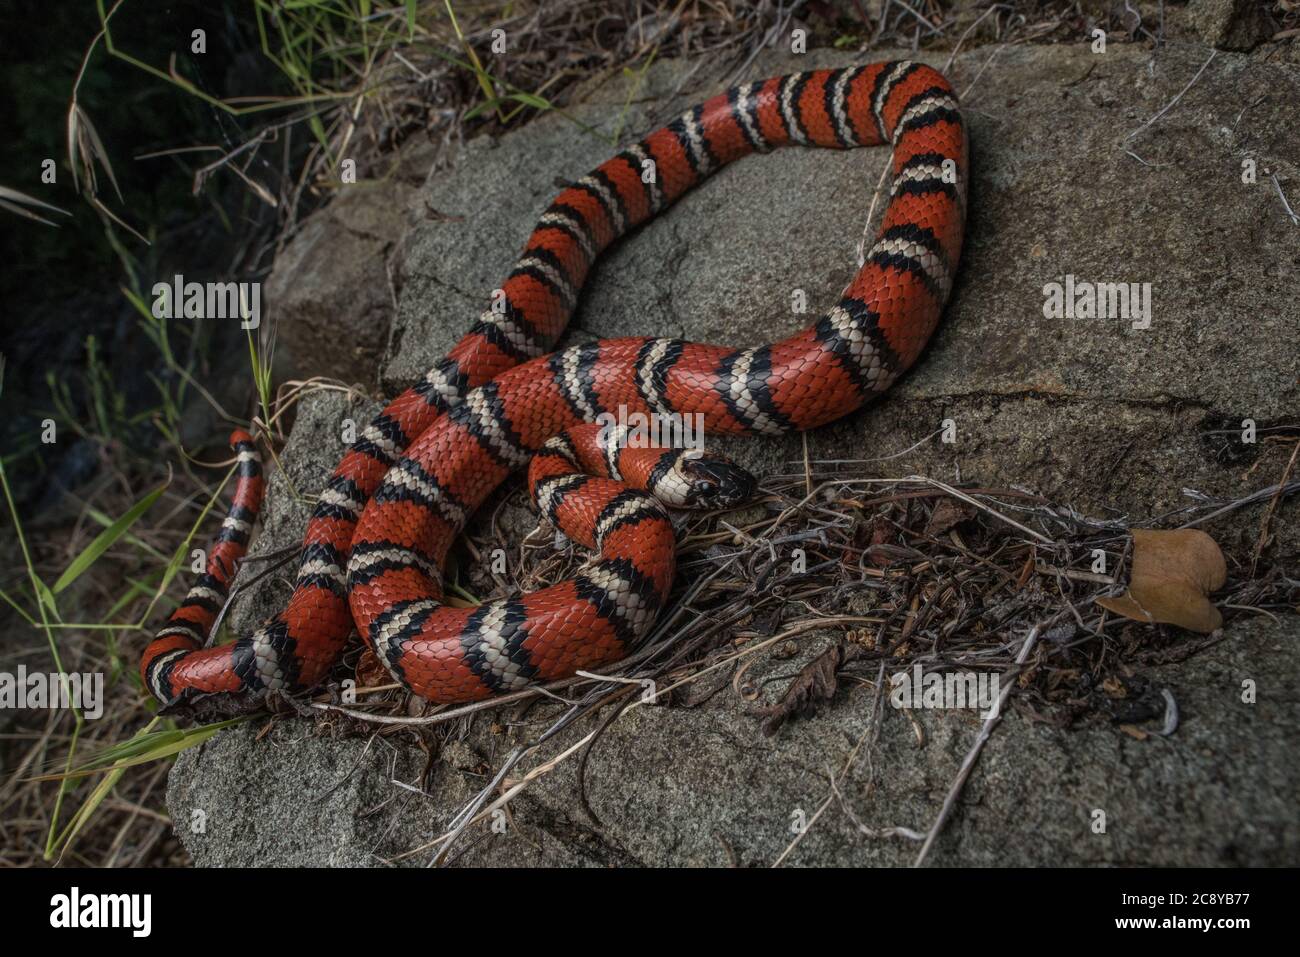 California mountain kingsnake (Lampropeltis zonata) in habitat, one of the most beautiful snakes of North America. Stock Photo